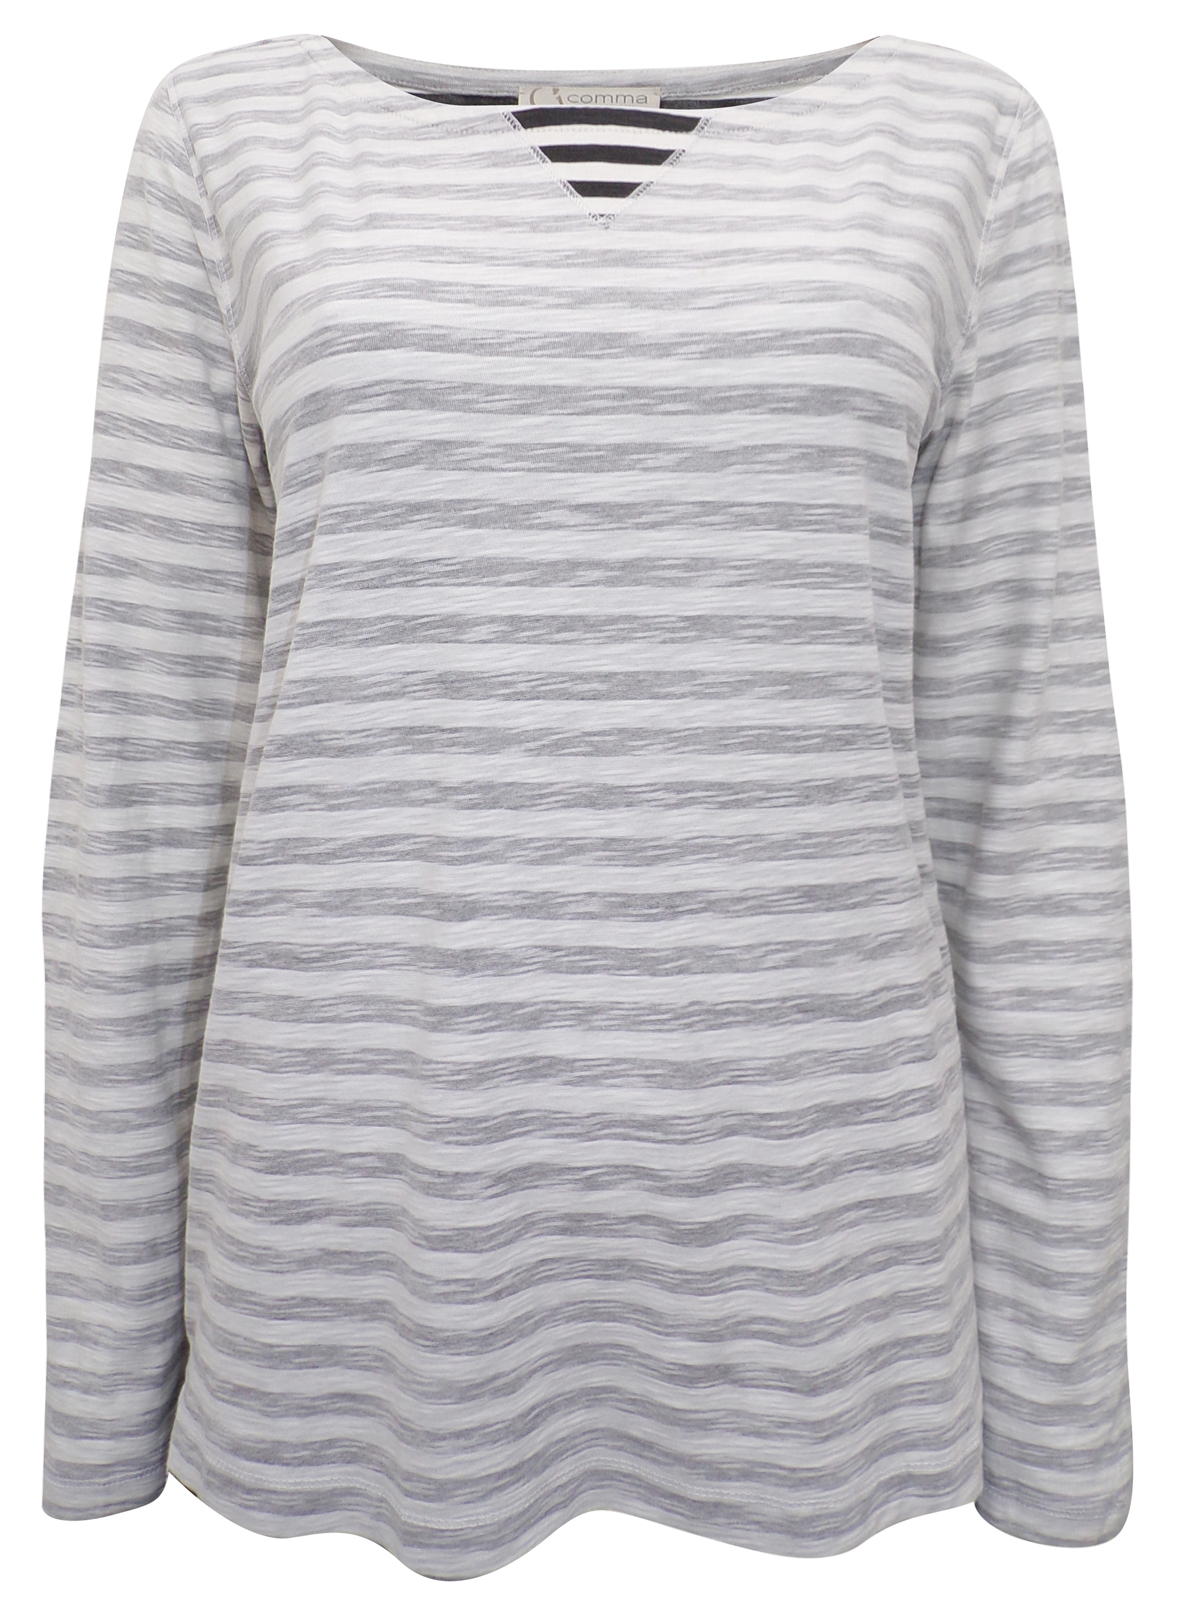 Comma - - Comma WHITE Pure Cotton Striped Long Sleeve Top - Size 8 to 20